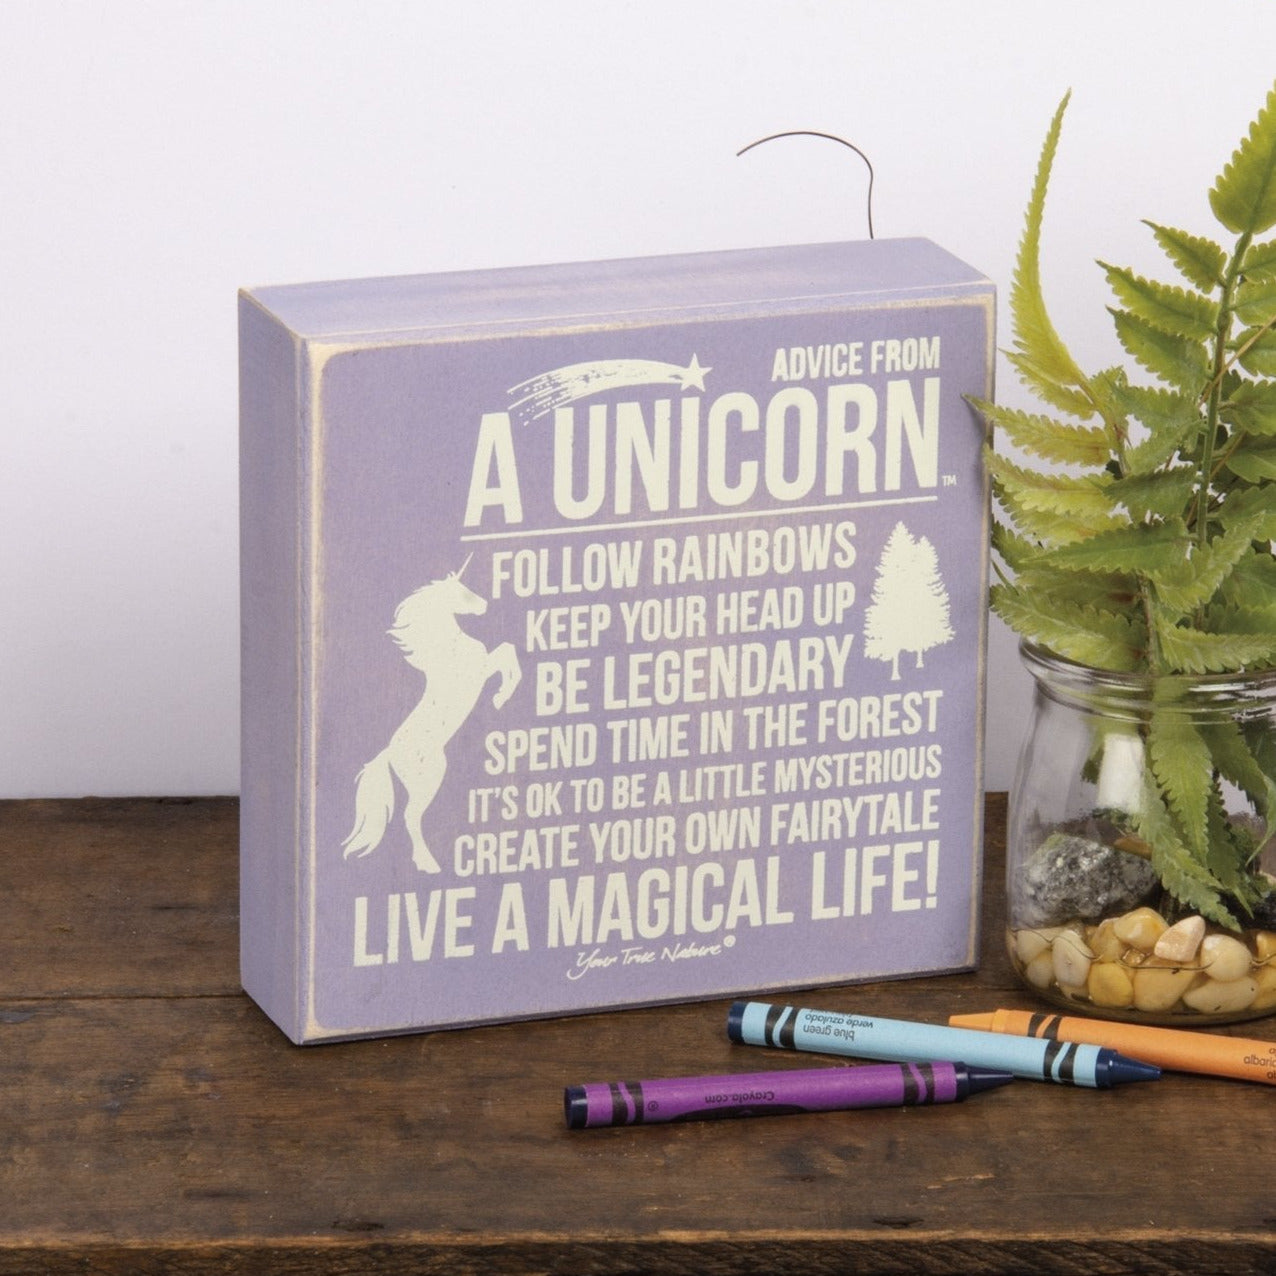 Advice From Unicorn Box Sign | Wood | Purple with White Lettering